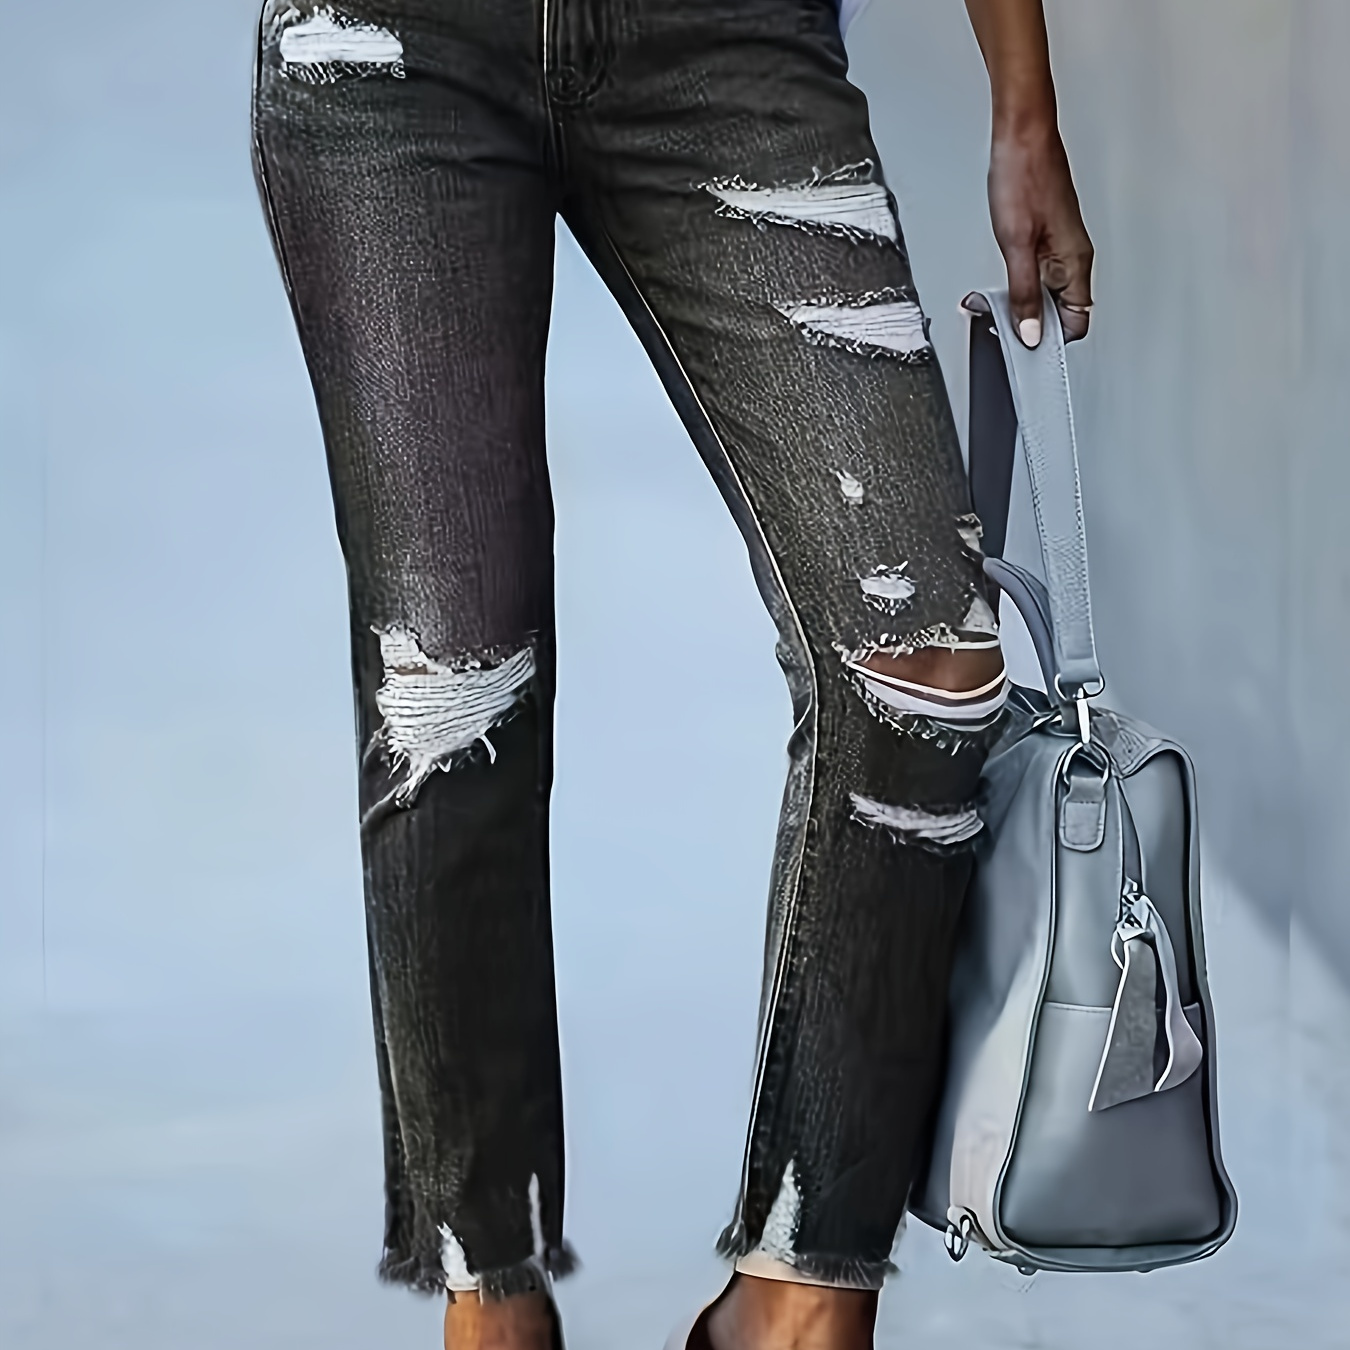 

Women's Fashion Ripped Jeans, Stretchy Denim, Casual Style, Ankle-length Pants With Distressed Detailing For Fall